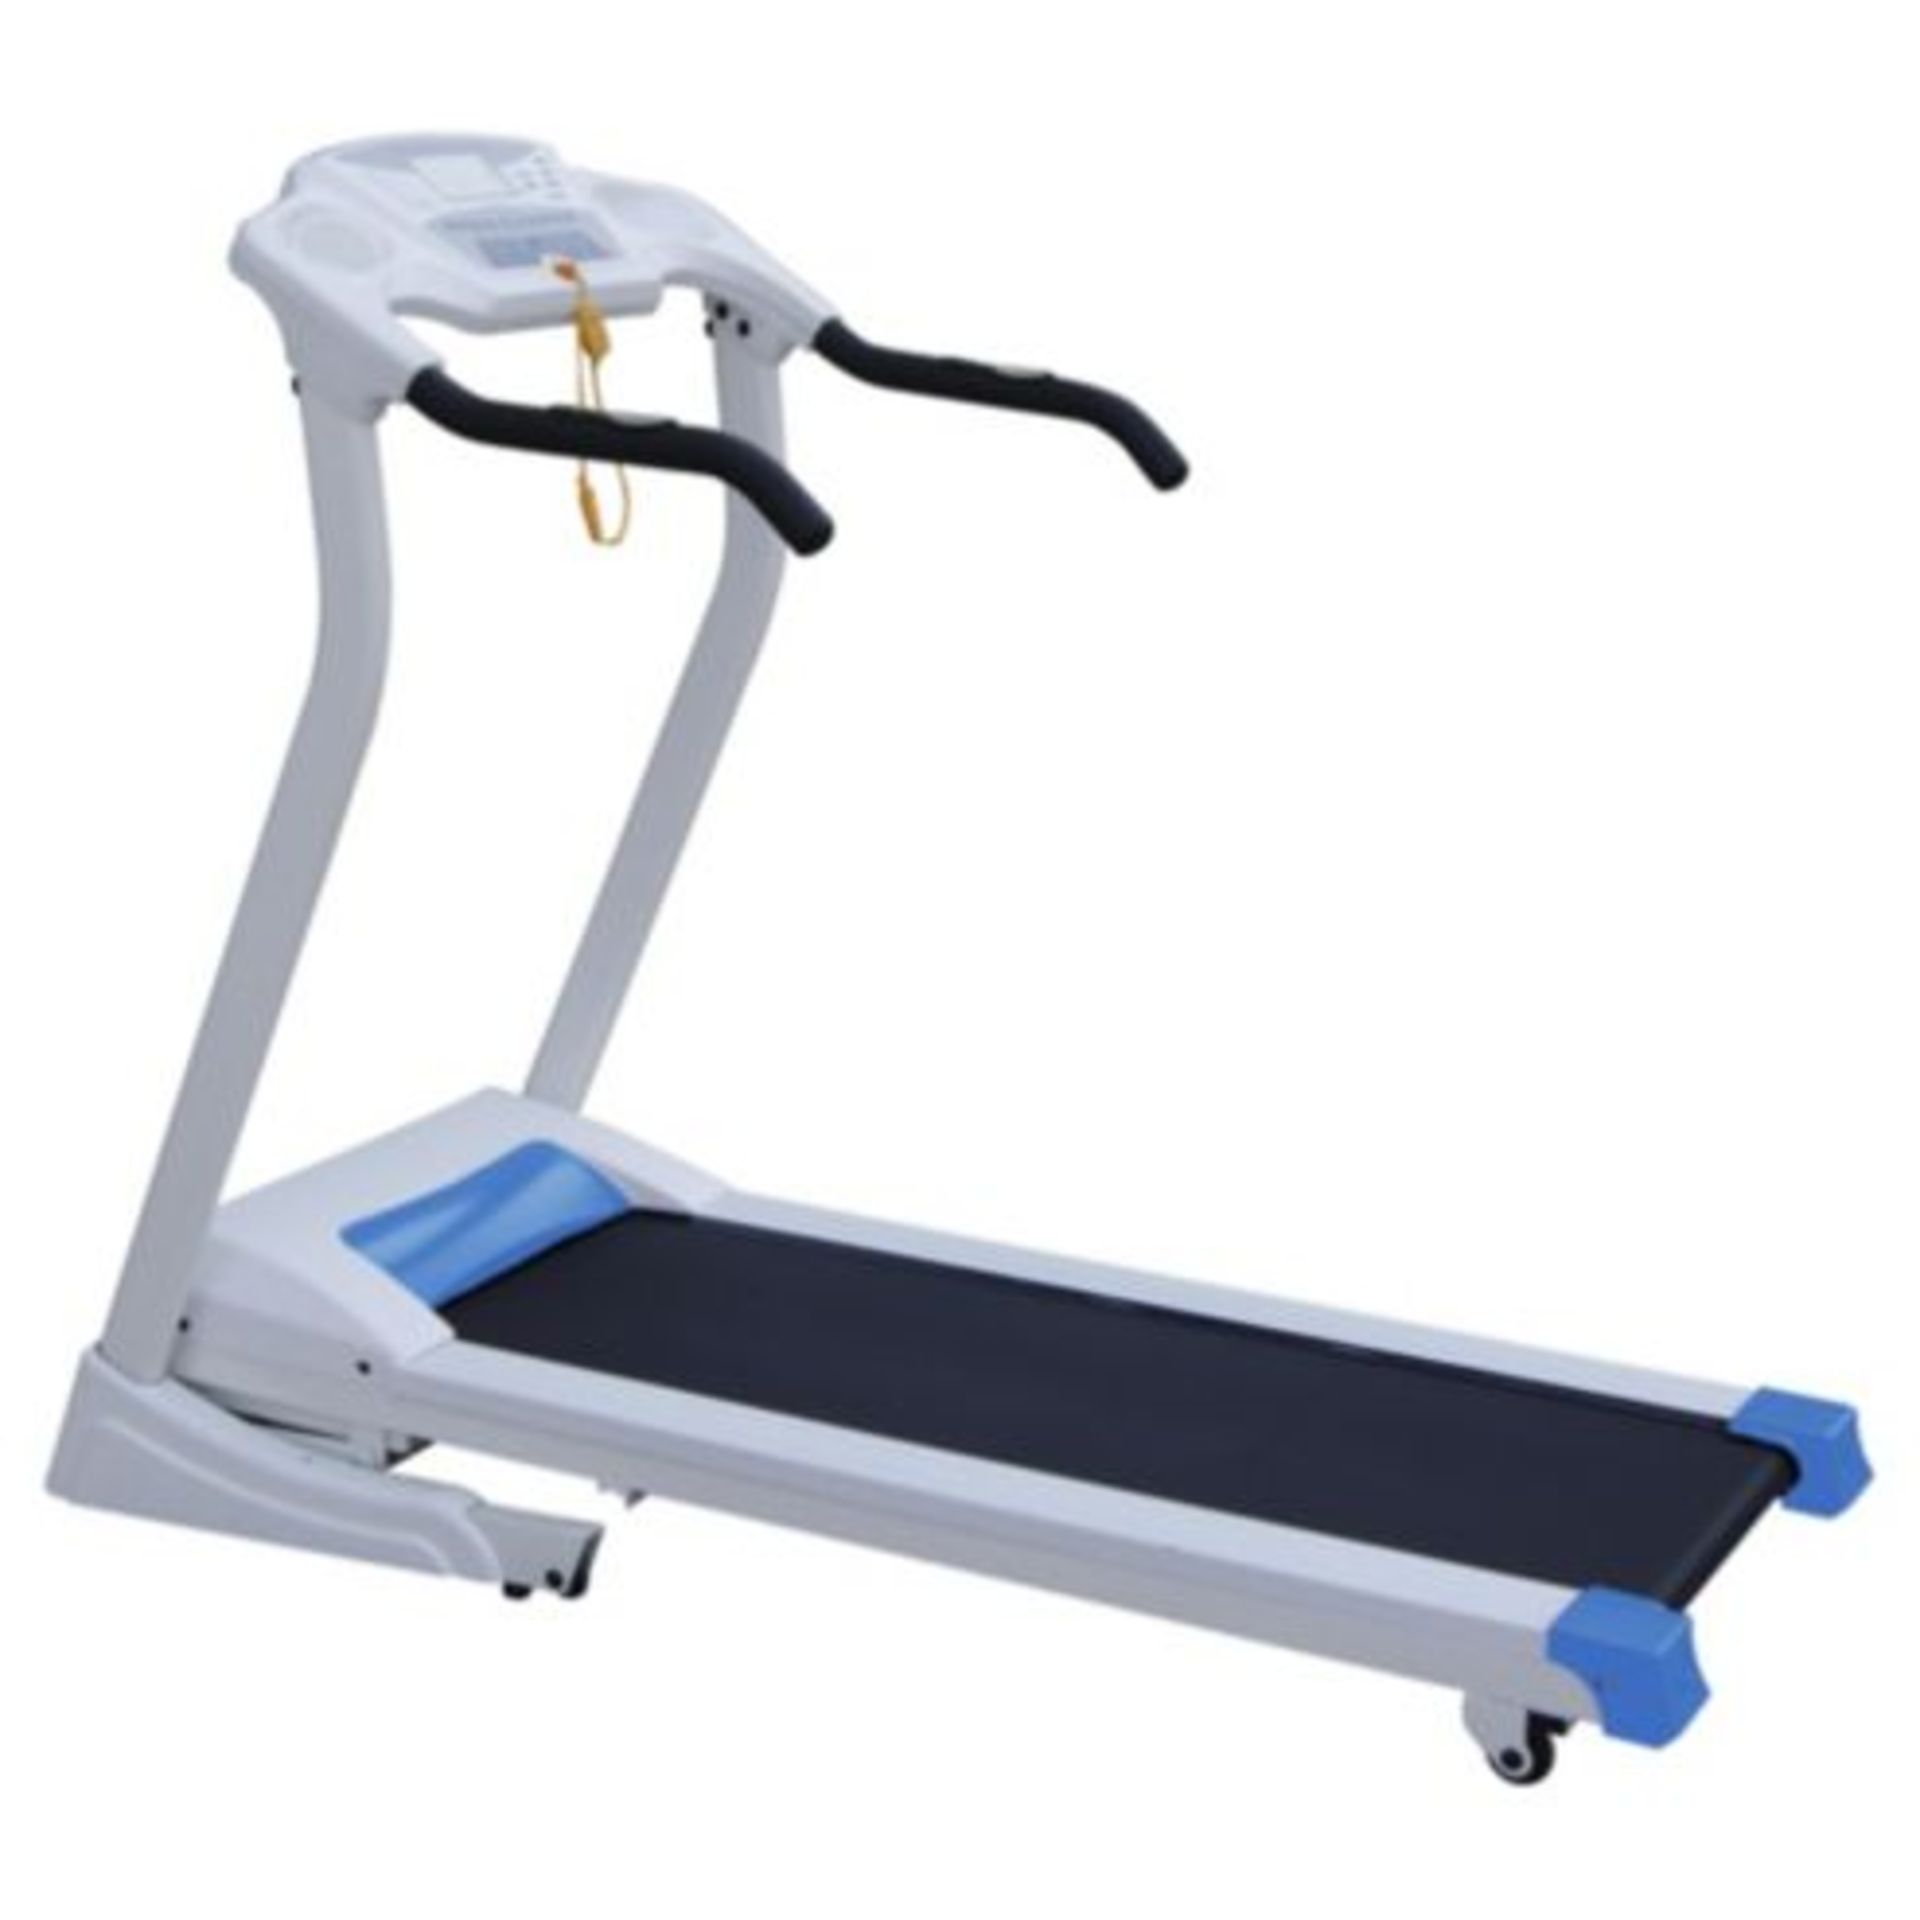 V Brand New Motorised Treadmill with 1.5hp Motor - Shock Absorbing Deck - LCD Monitor Displaying